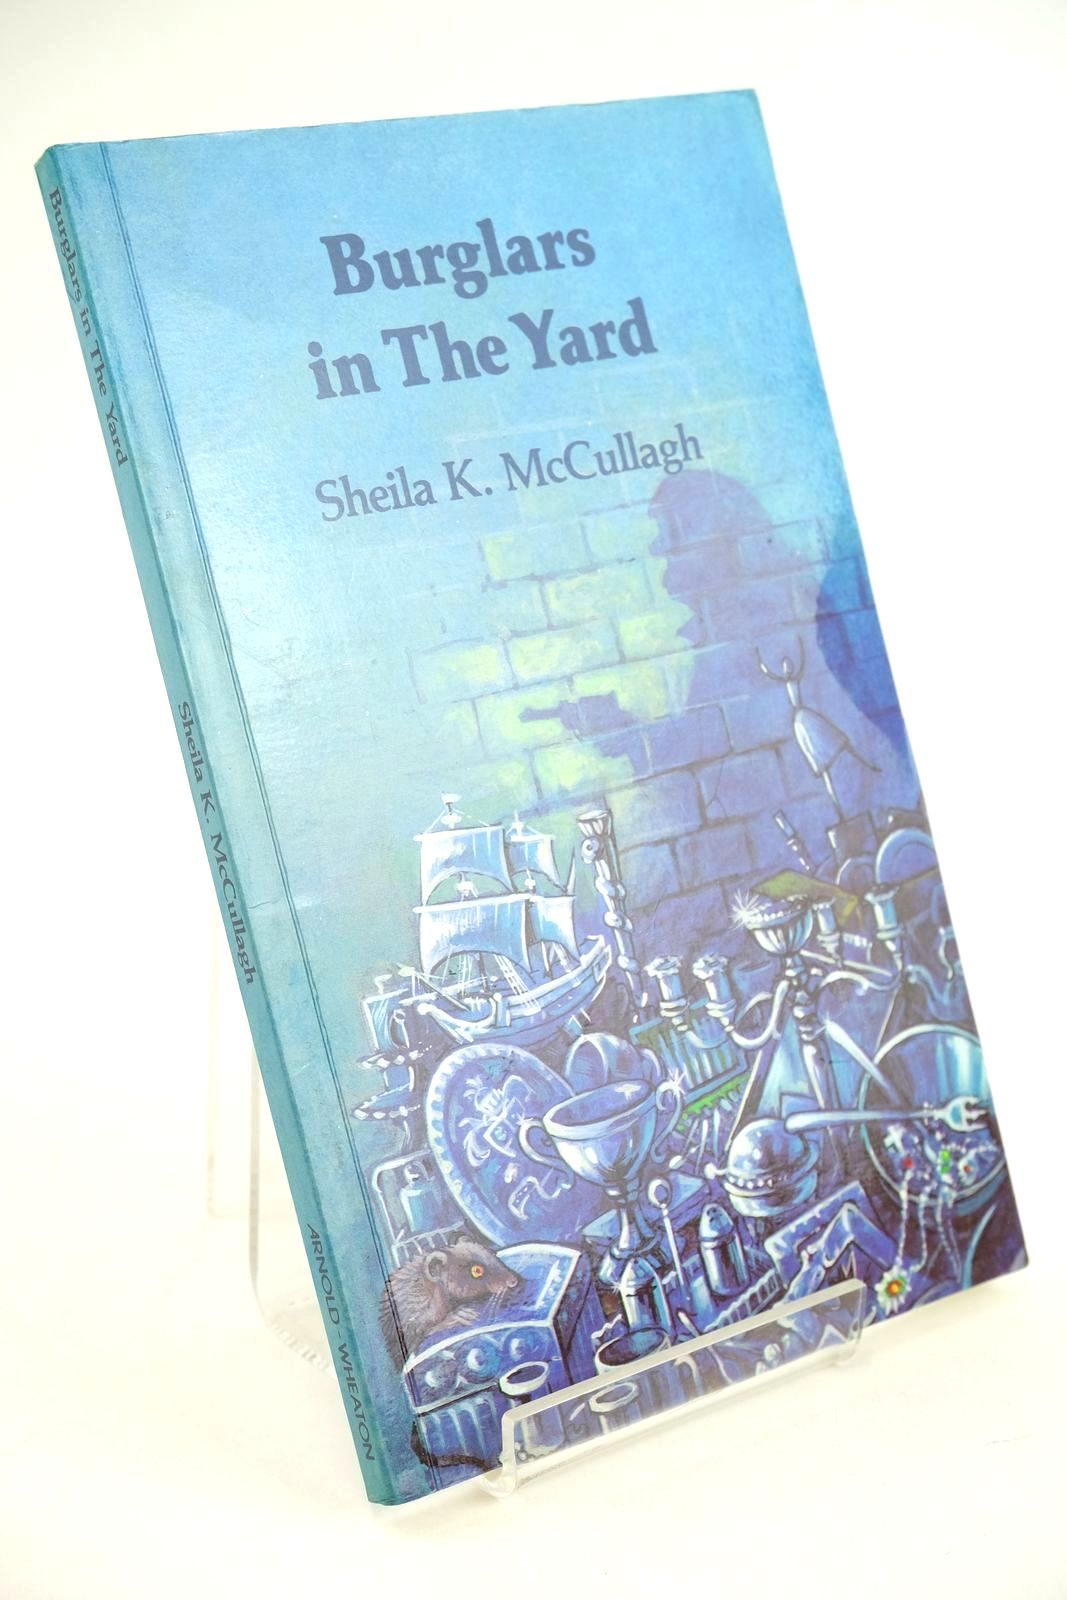 Photo of BURGLARS IN THE YARD written by McCullagh, Sheila K. illustrated by Mutimer, Ray published by Arnold Wheaton (STOCK CODE: 1323980)  for sale by Stella & Rose's Books